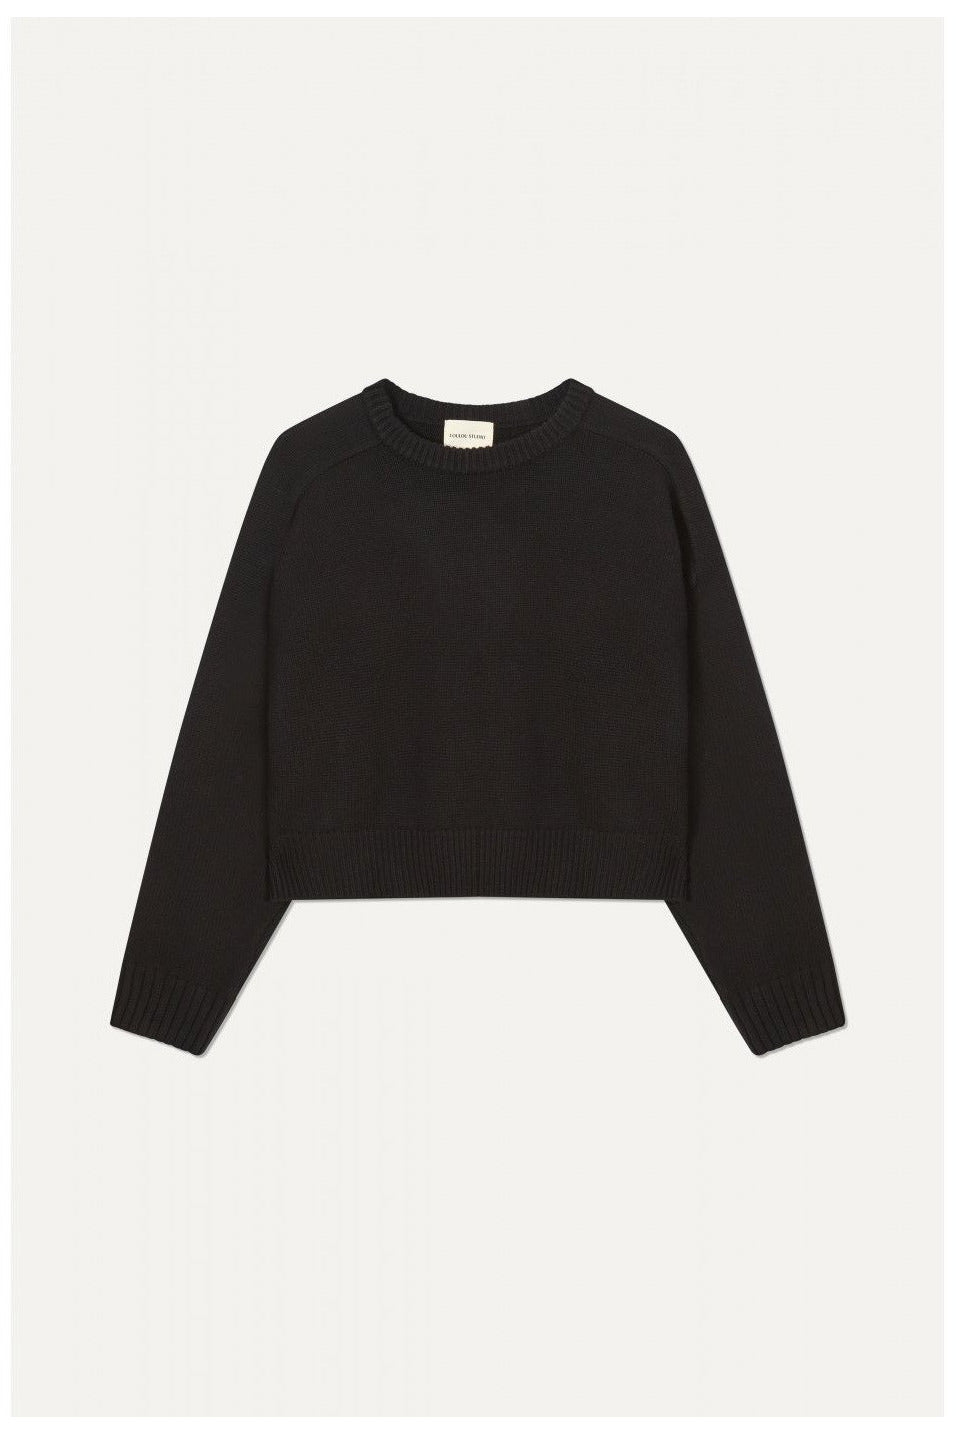 CASHMERE WOOL CROPPED SWEATER BY LOULOU STUDIO IN BLACK - BEYOND STUDIOS